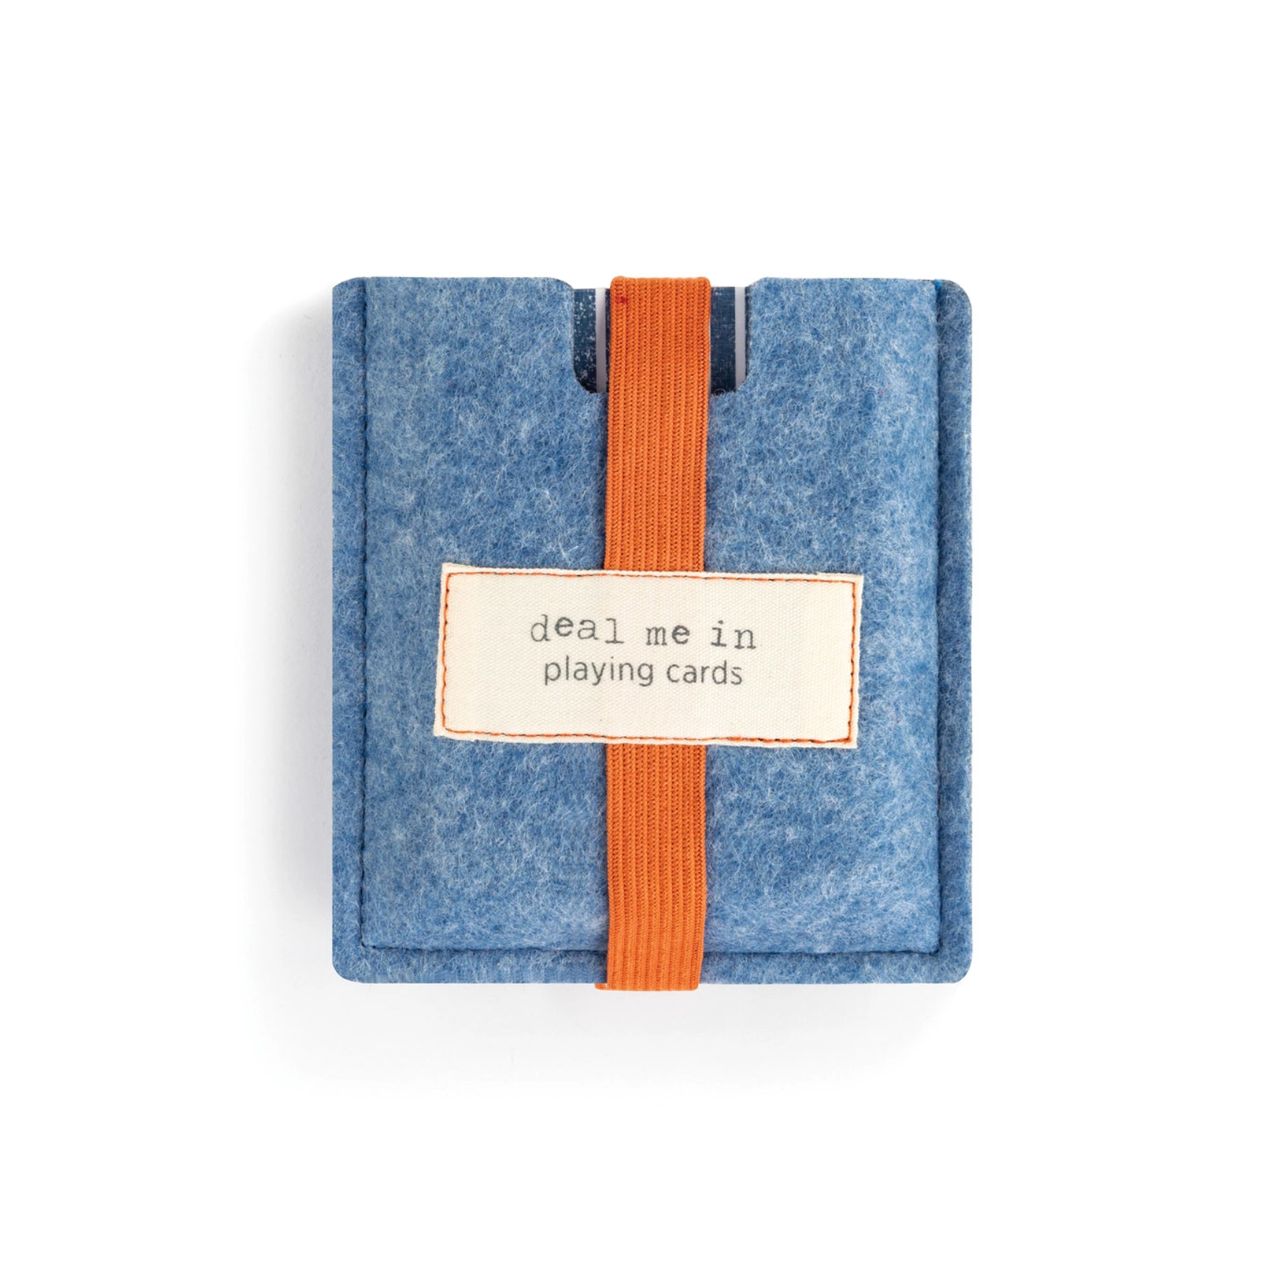 Deal Me in Playing Cards  Our Deal Me In Playing Cards is a deck or playing cards like no another, covered with a blue and white striped back and stored in a blue-heathered felt pouch these are great to take with you anywhere.